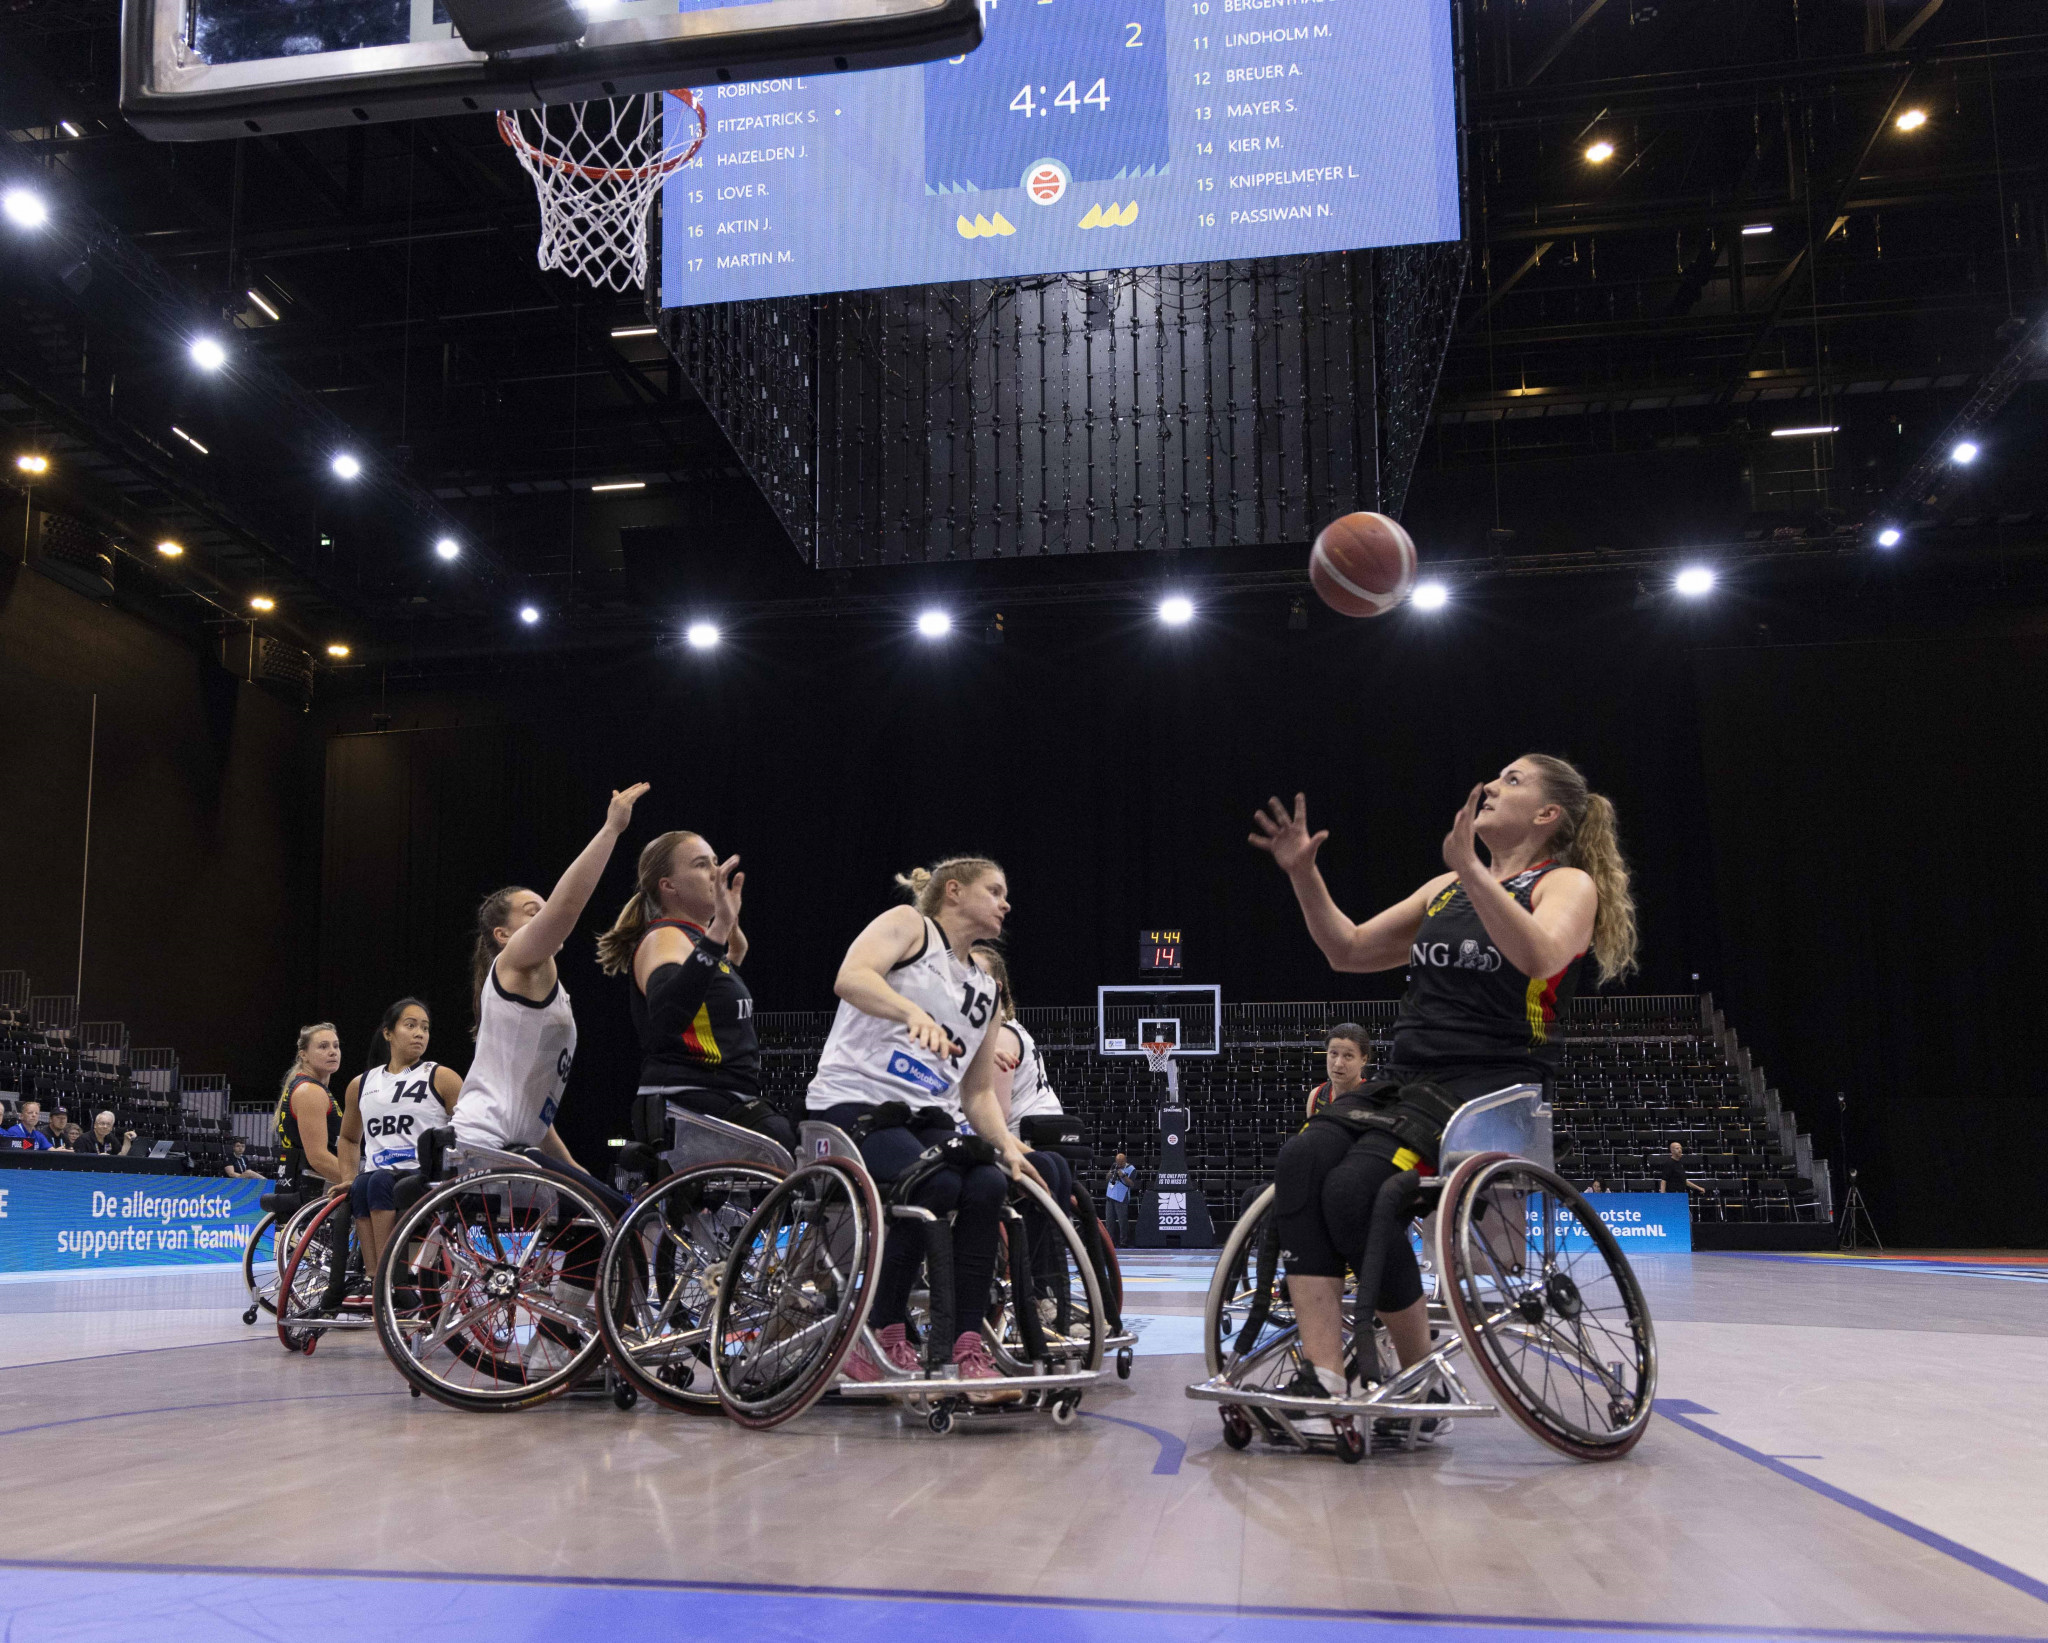 A total of 11 wheelchair basketball matches took place across the men's and women's competitions ©EPC